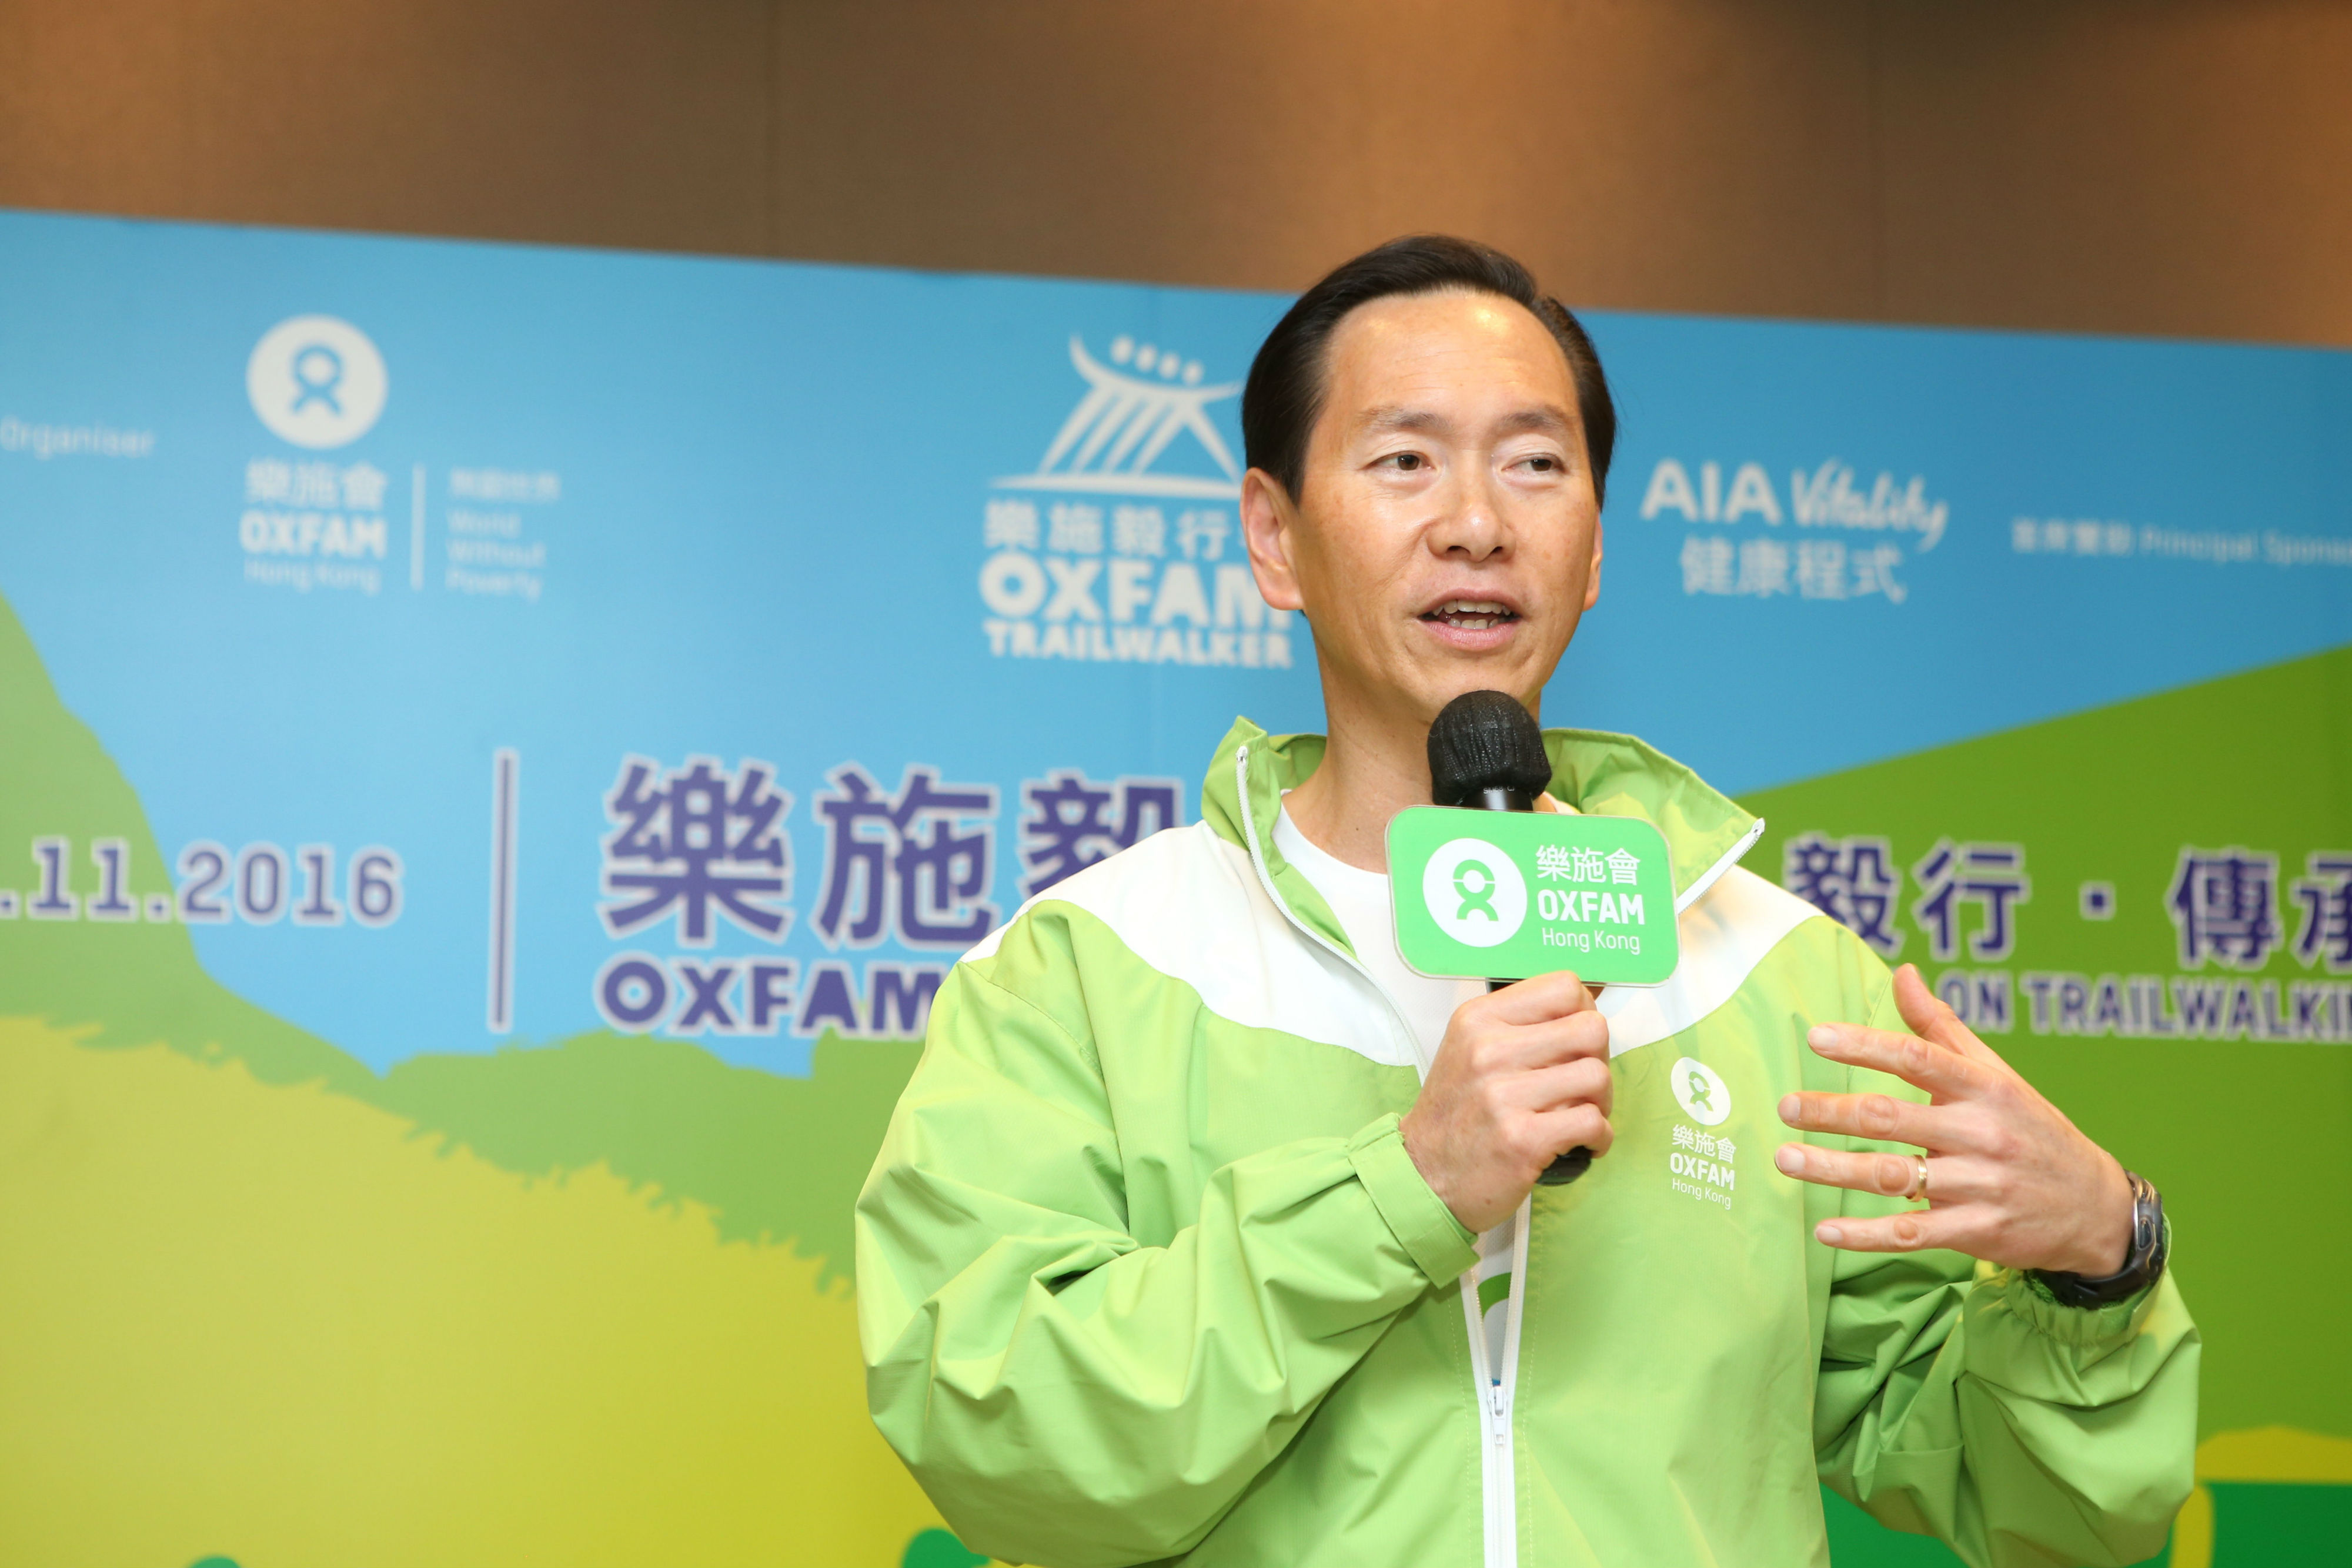 Bernard Chan, Chair of Oxfam Trailwalker Advisory Committee,  gave the opening speech at the Oxfam Trailwalker 2016 press conference today.